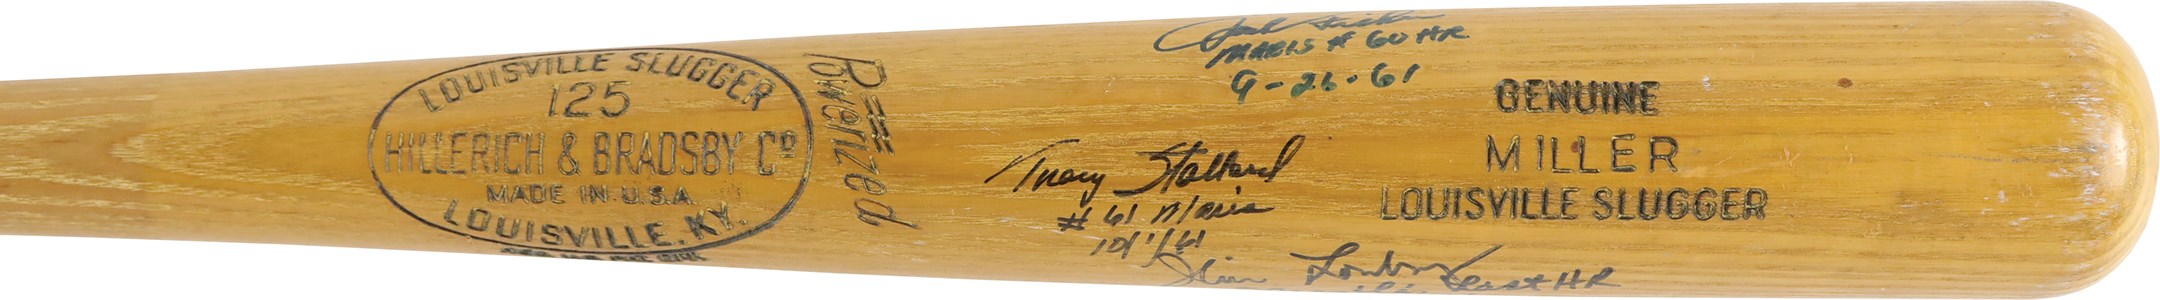 Baseball Autographs - Mickey Mantle and Roger Maris Home Run Pitchers Signed Bat